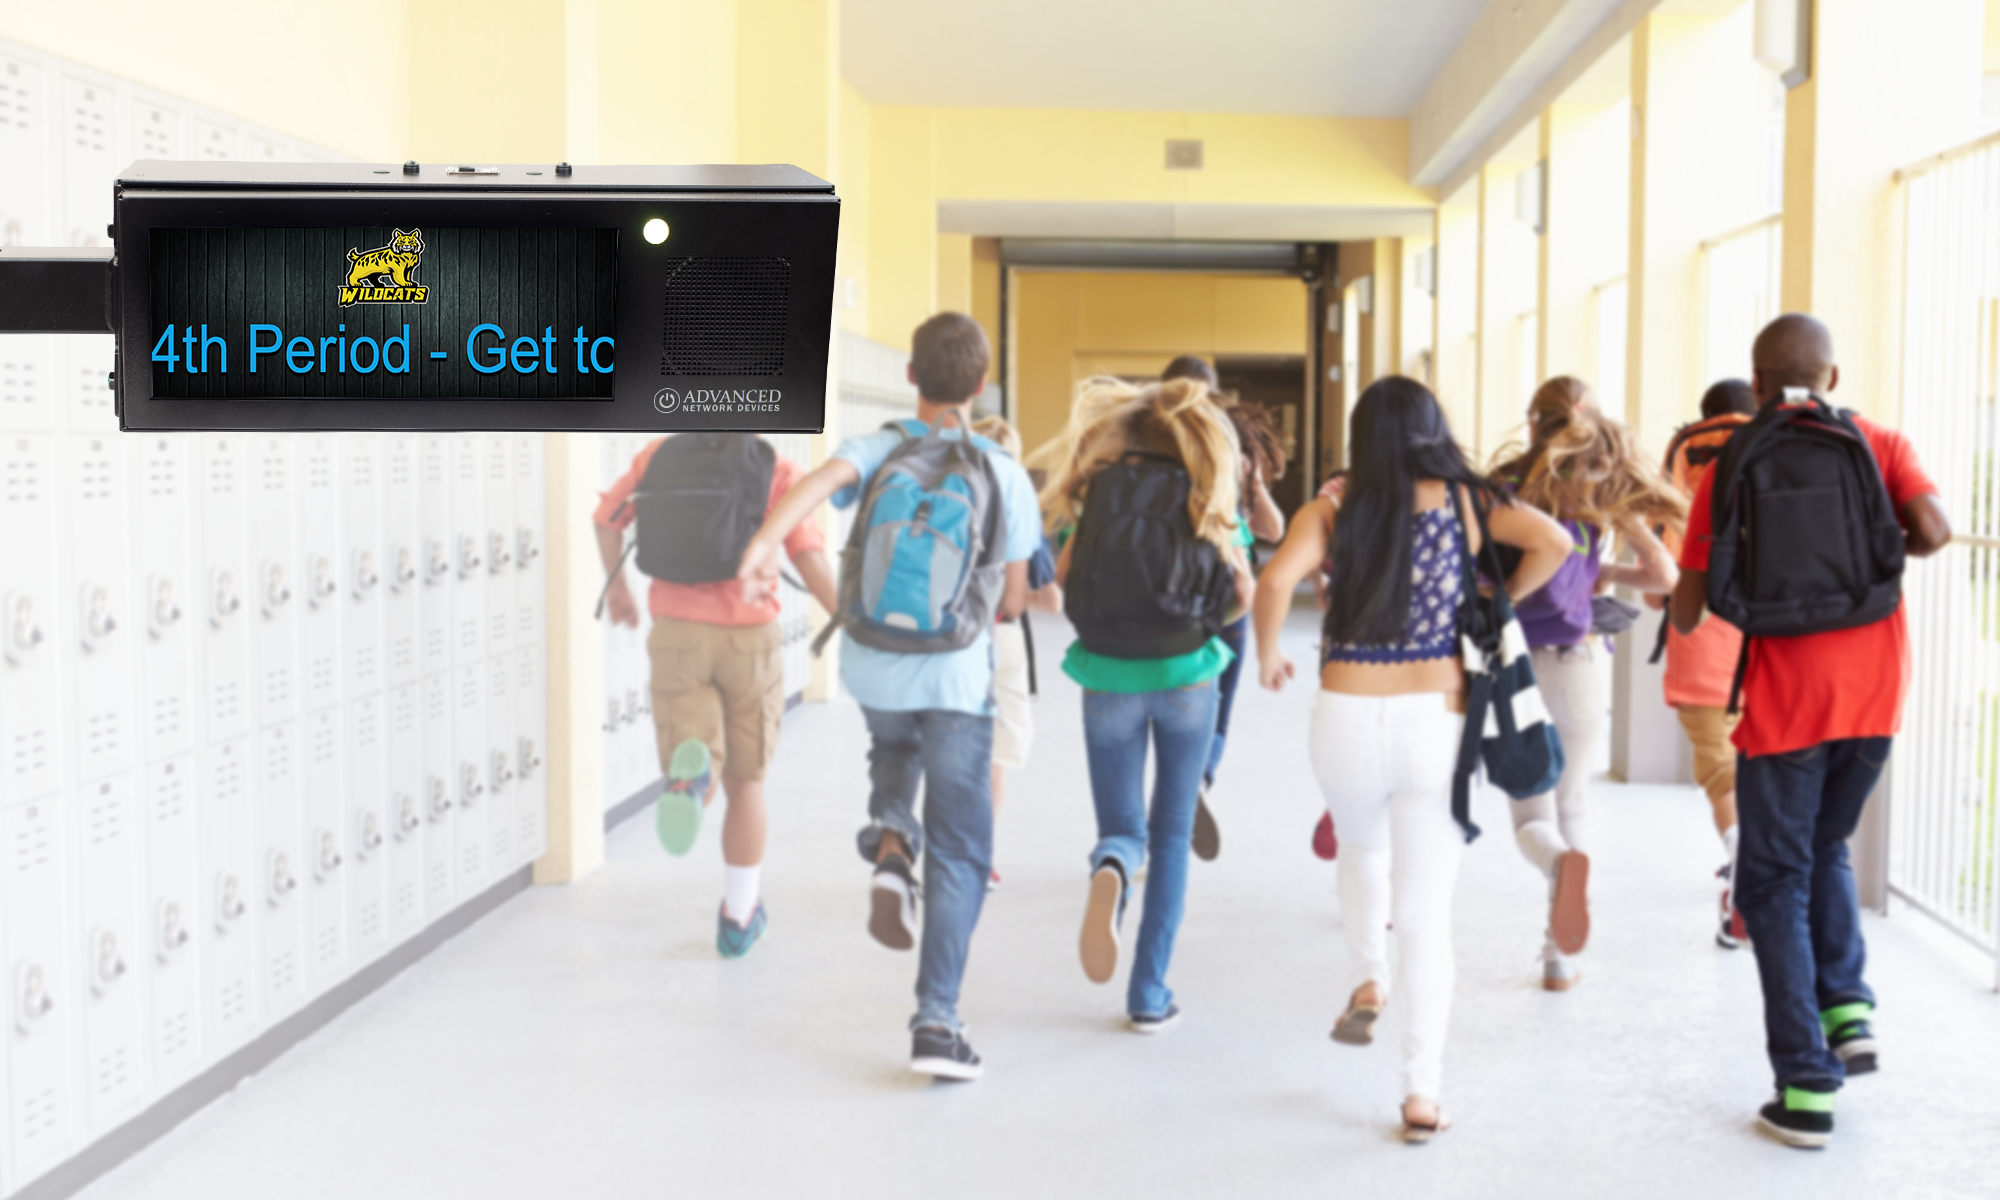 bell-scheduling-on-double-sided-hd-ip-display-in-school-hallway